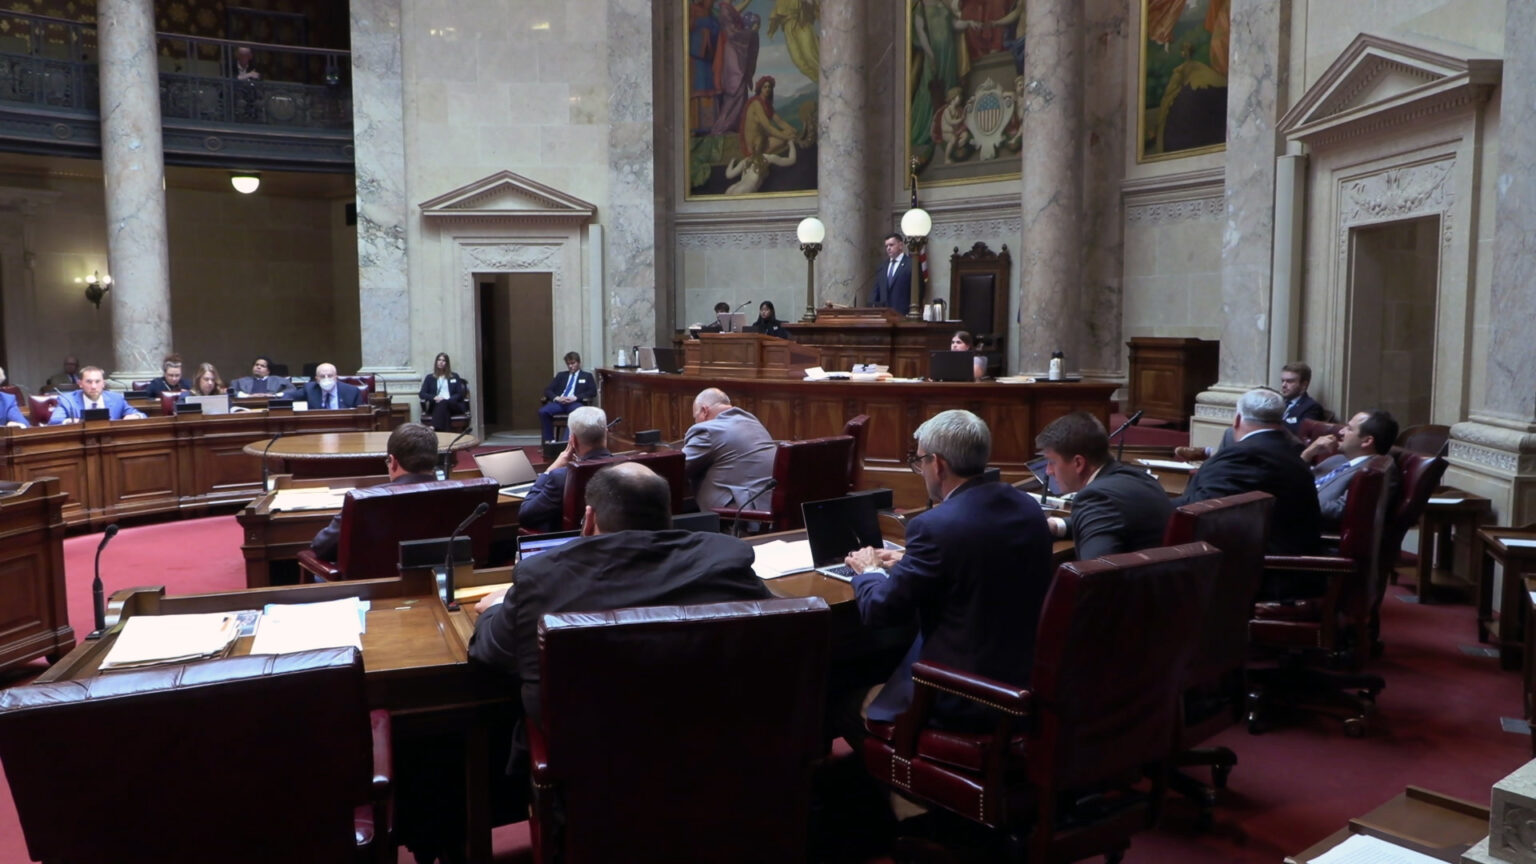 People sit in multiple, curved rows of desks equipped with microphones and look at laptop computers and speak to each other, in a room with marble masonry and pillars, large paintings, and a second-level seating gallery.